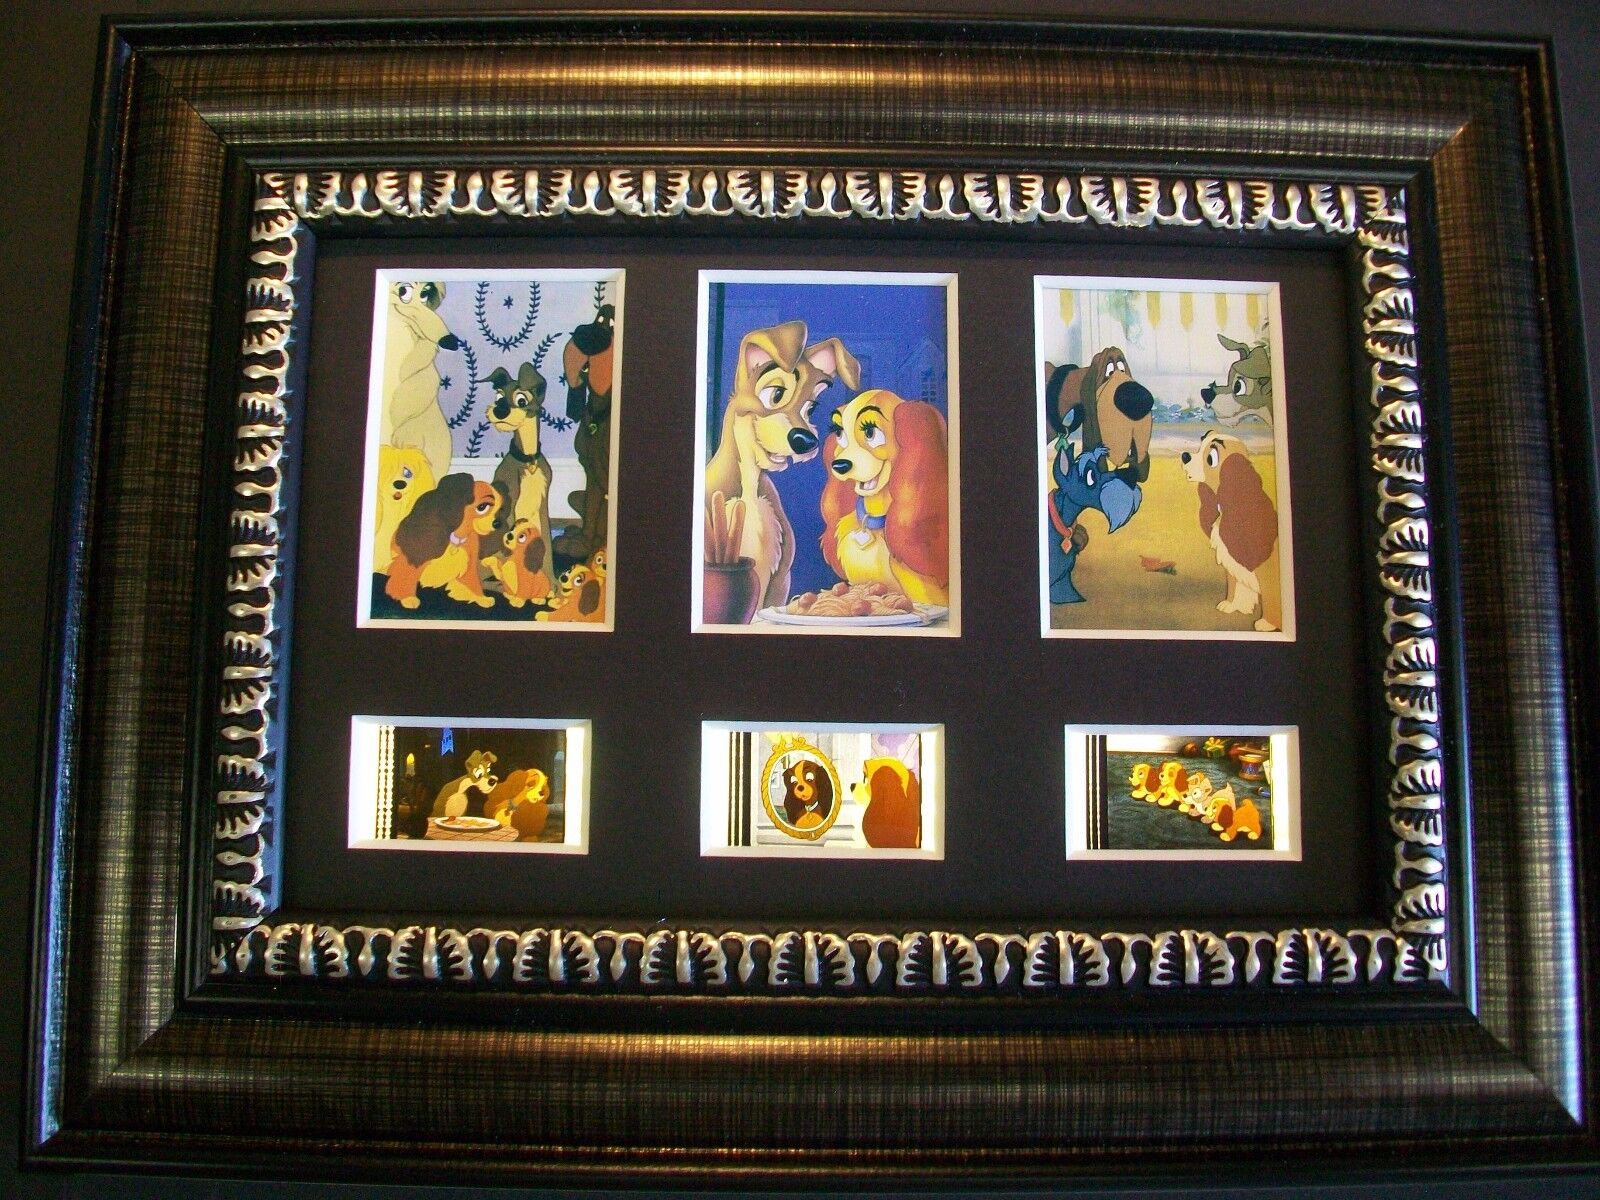 LADY AND THE TRAMP Framed Trio Movie Film Cell Memorabilia Colle